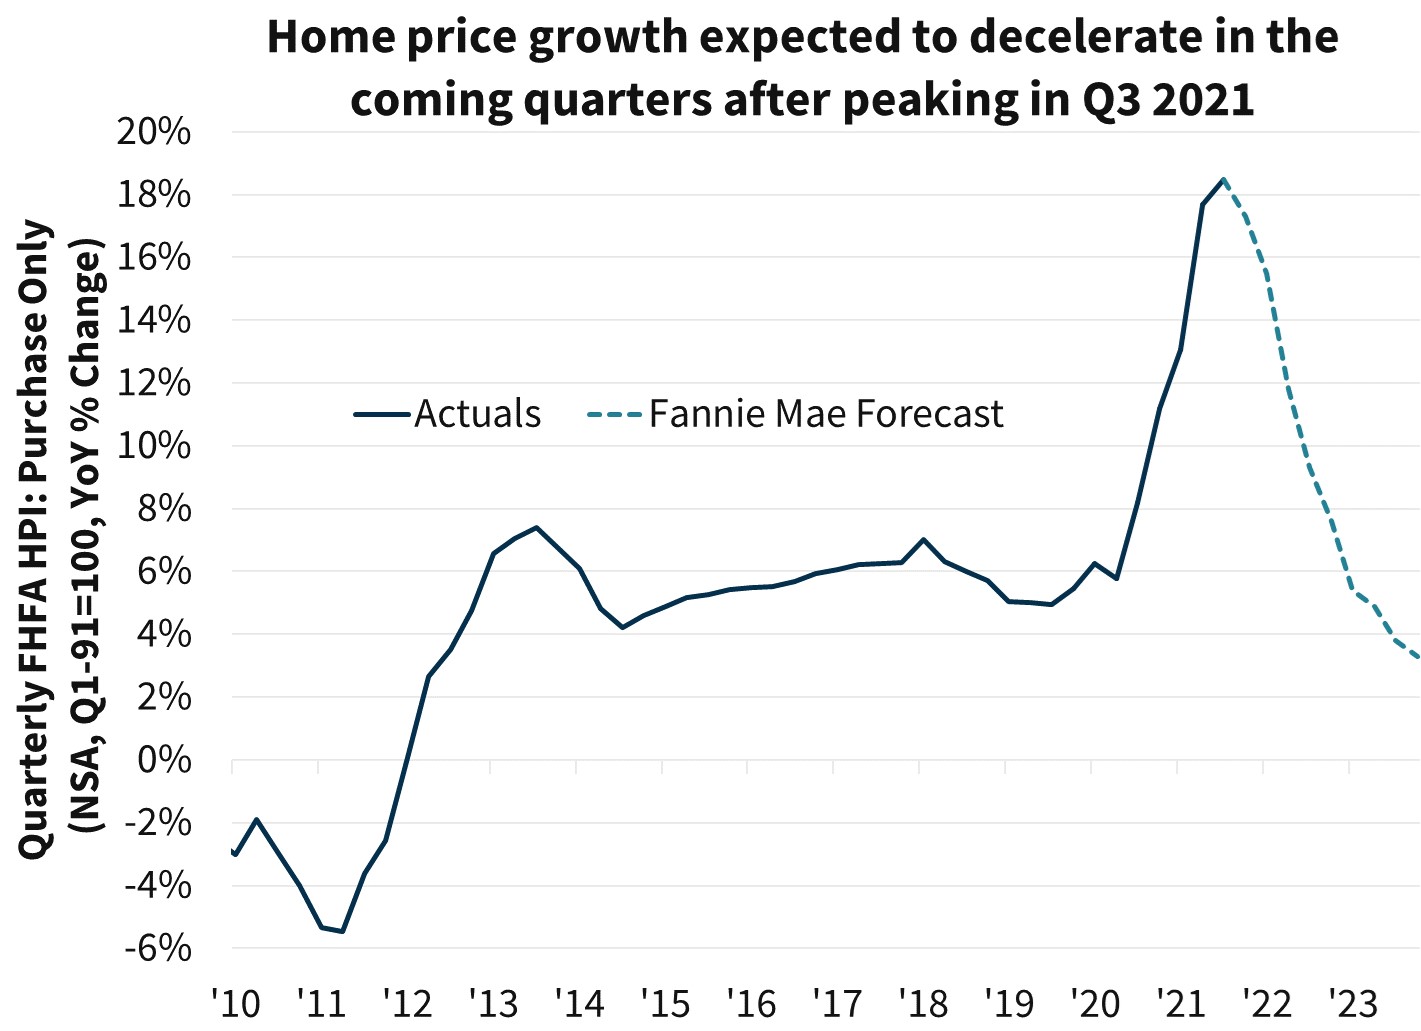 Home price growth expected to decelerate in the coming quarters